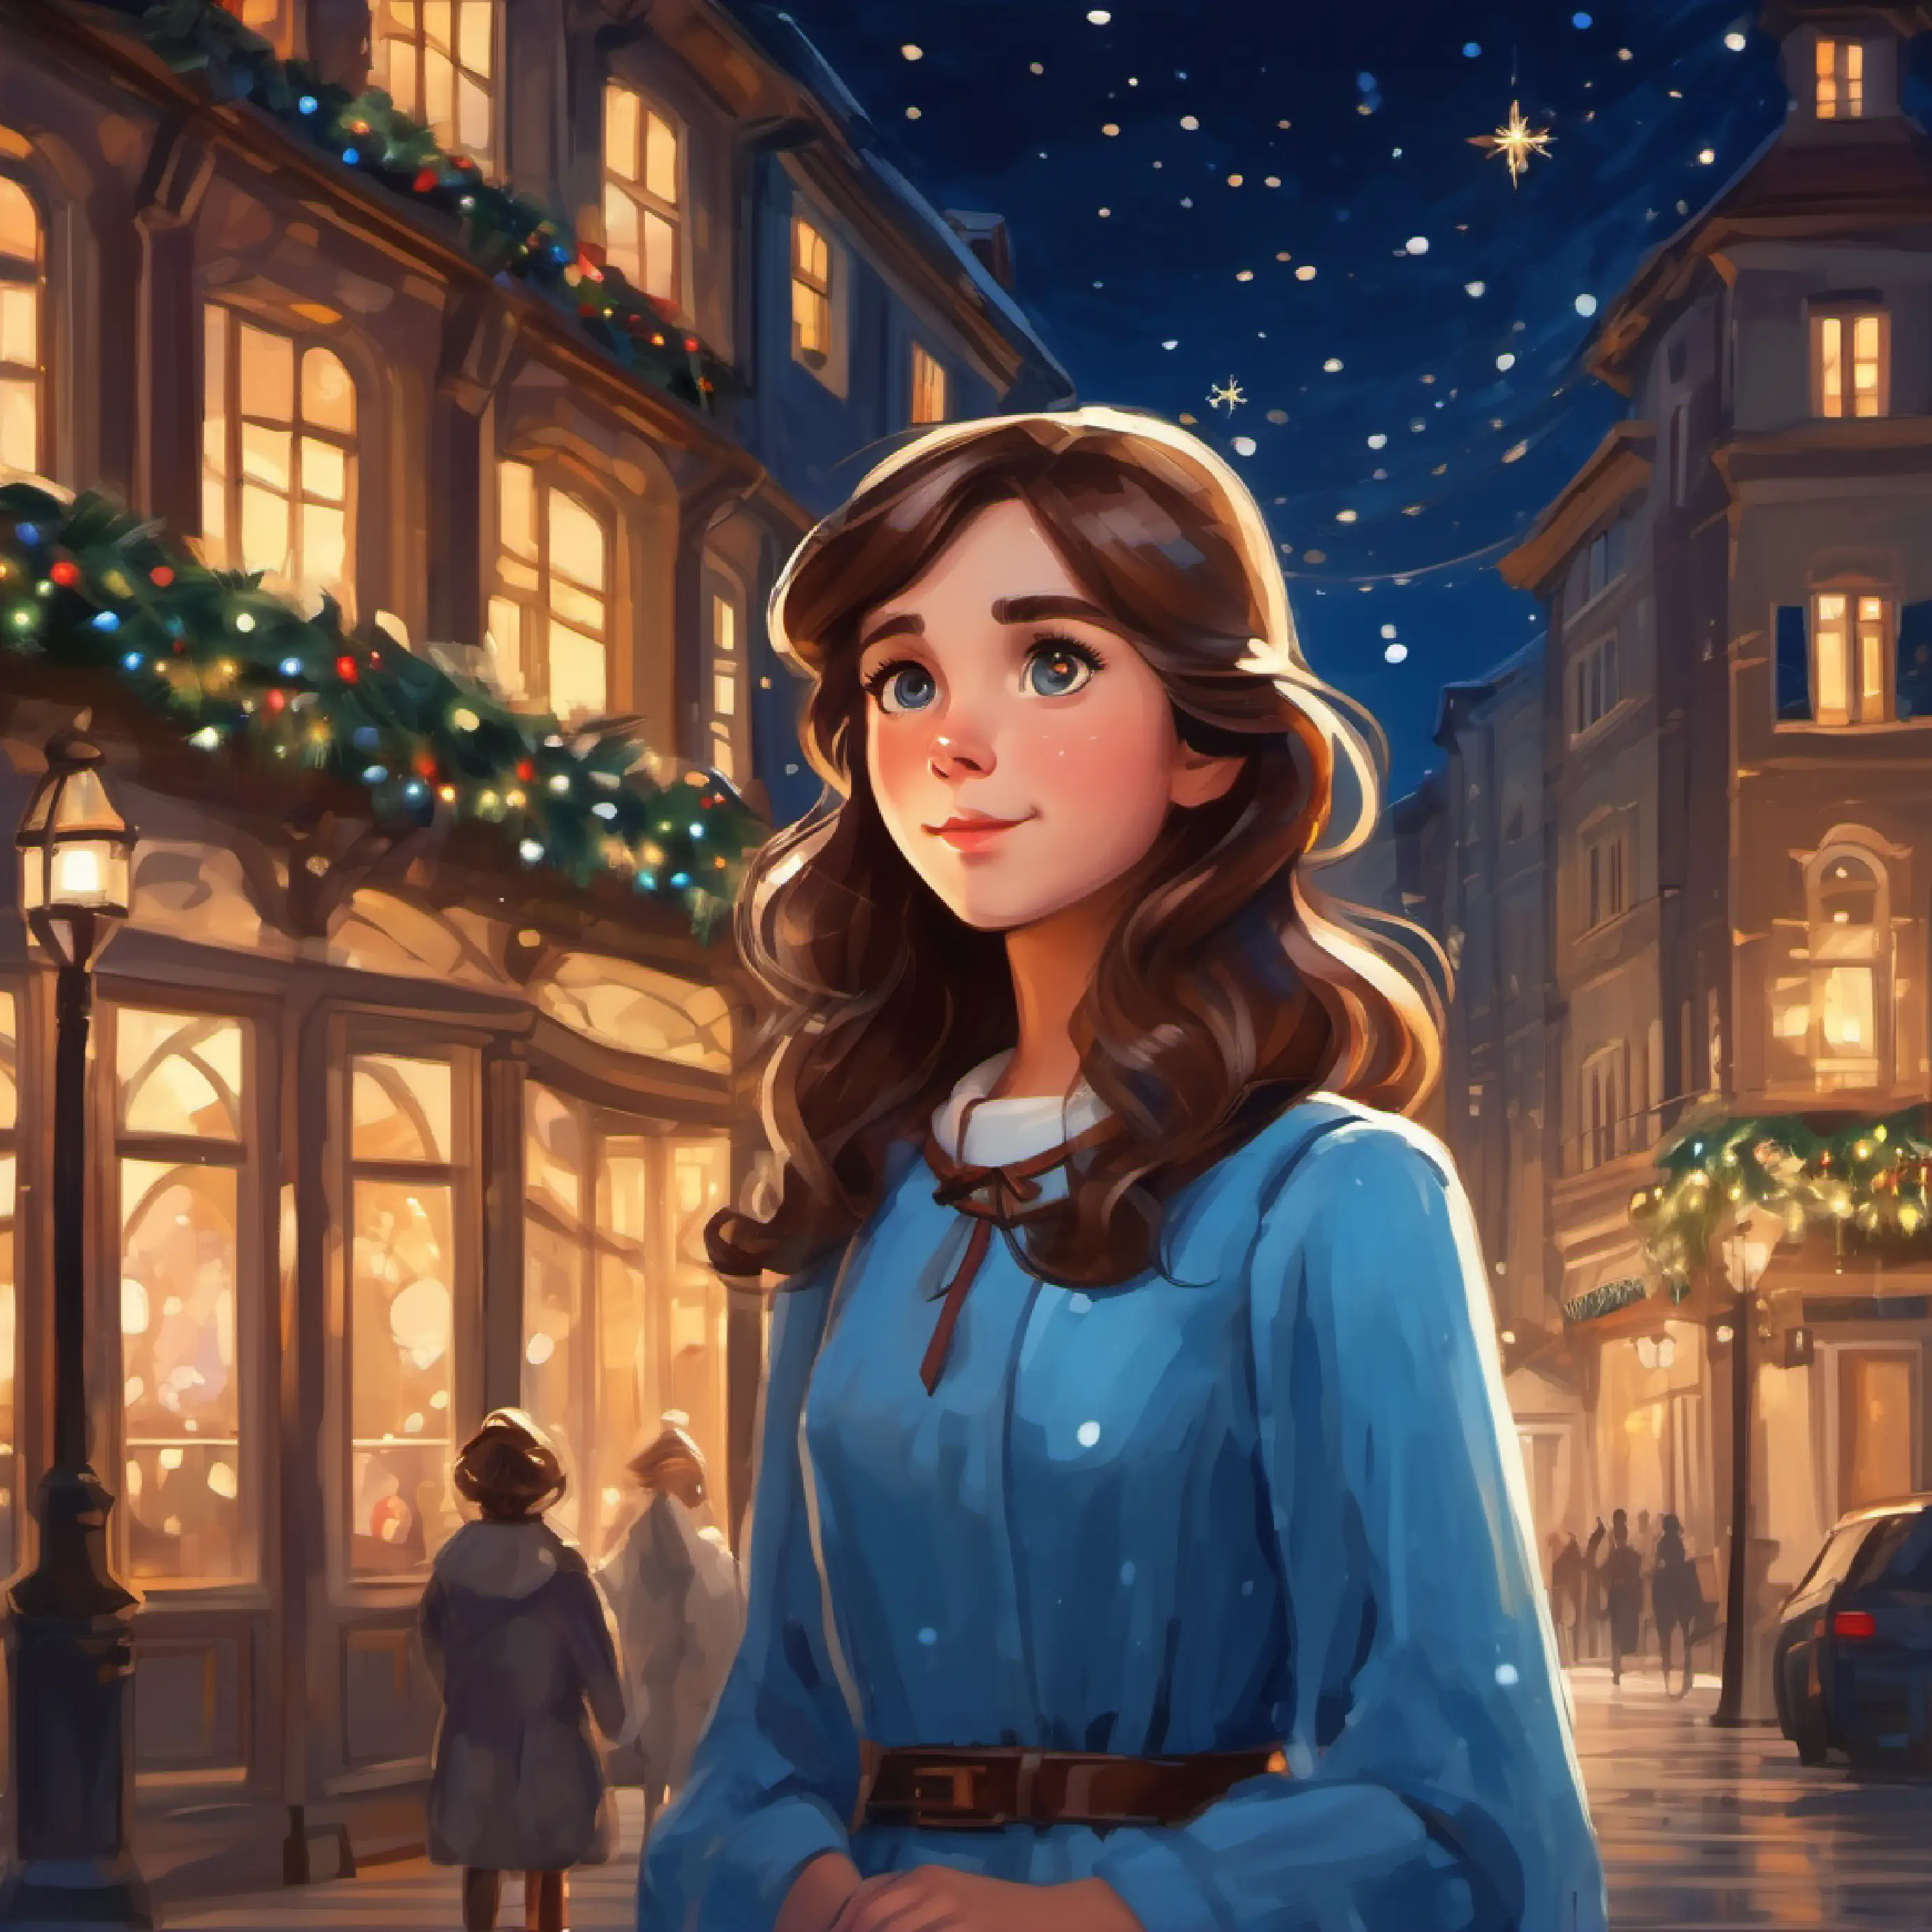 A girl with brown hair and eyes, wearing a blue dress's realization, friendship bond, reflective nighttime.